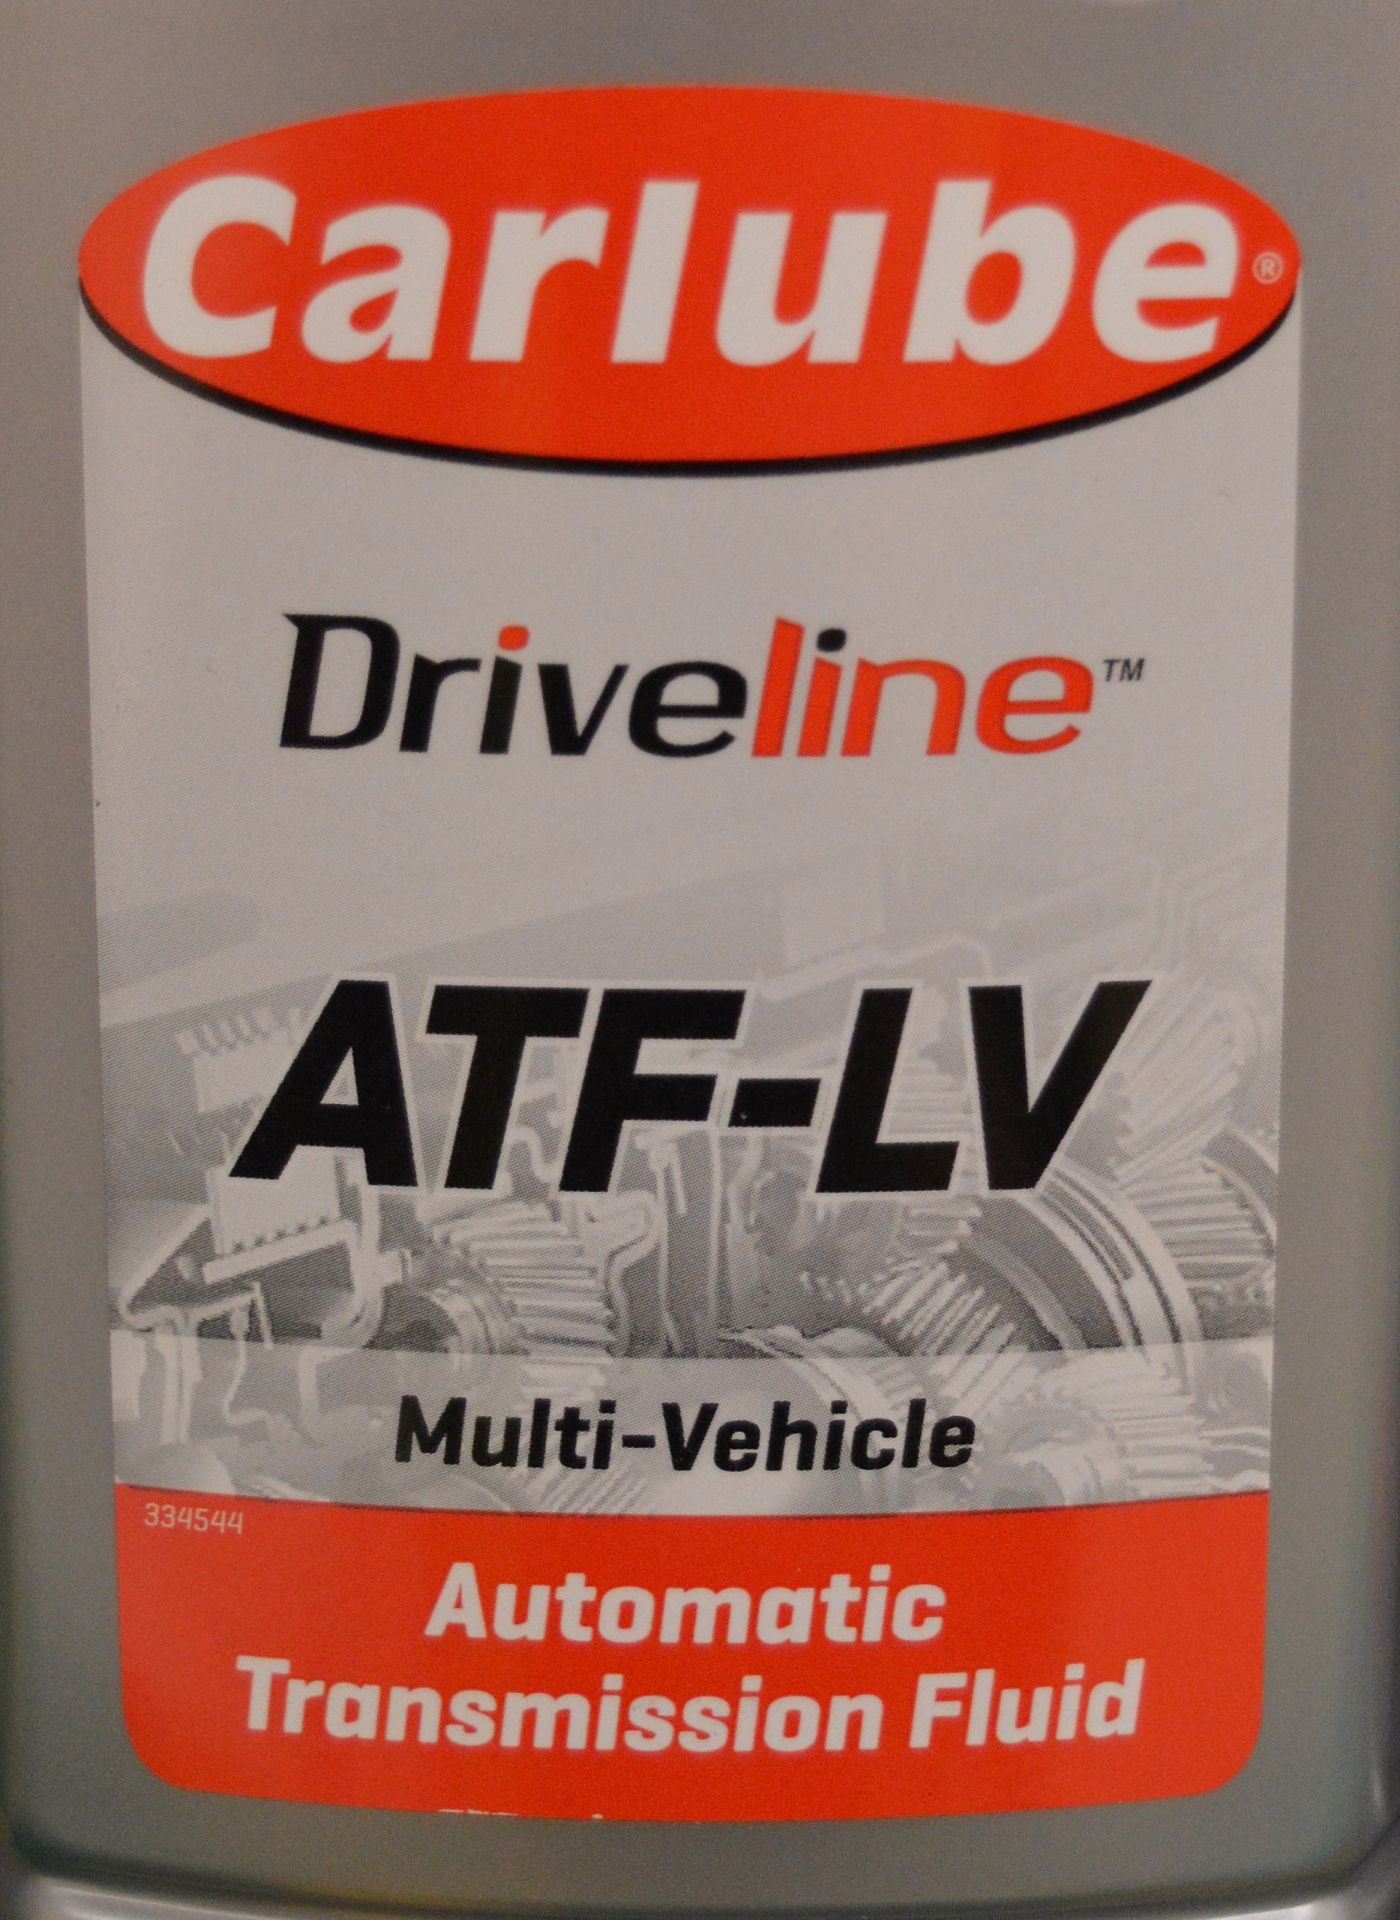 9x Carlube ATF-LV Automatic transmission fluid - 1L - Image 2 of 3